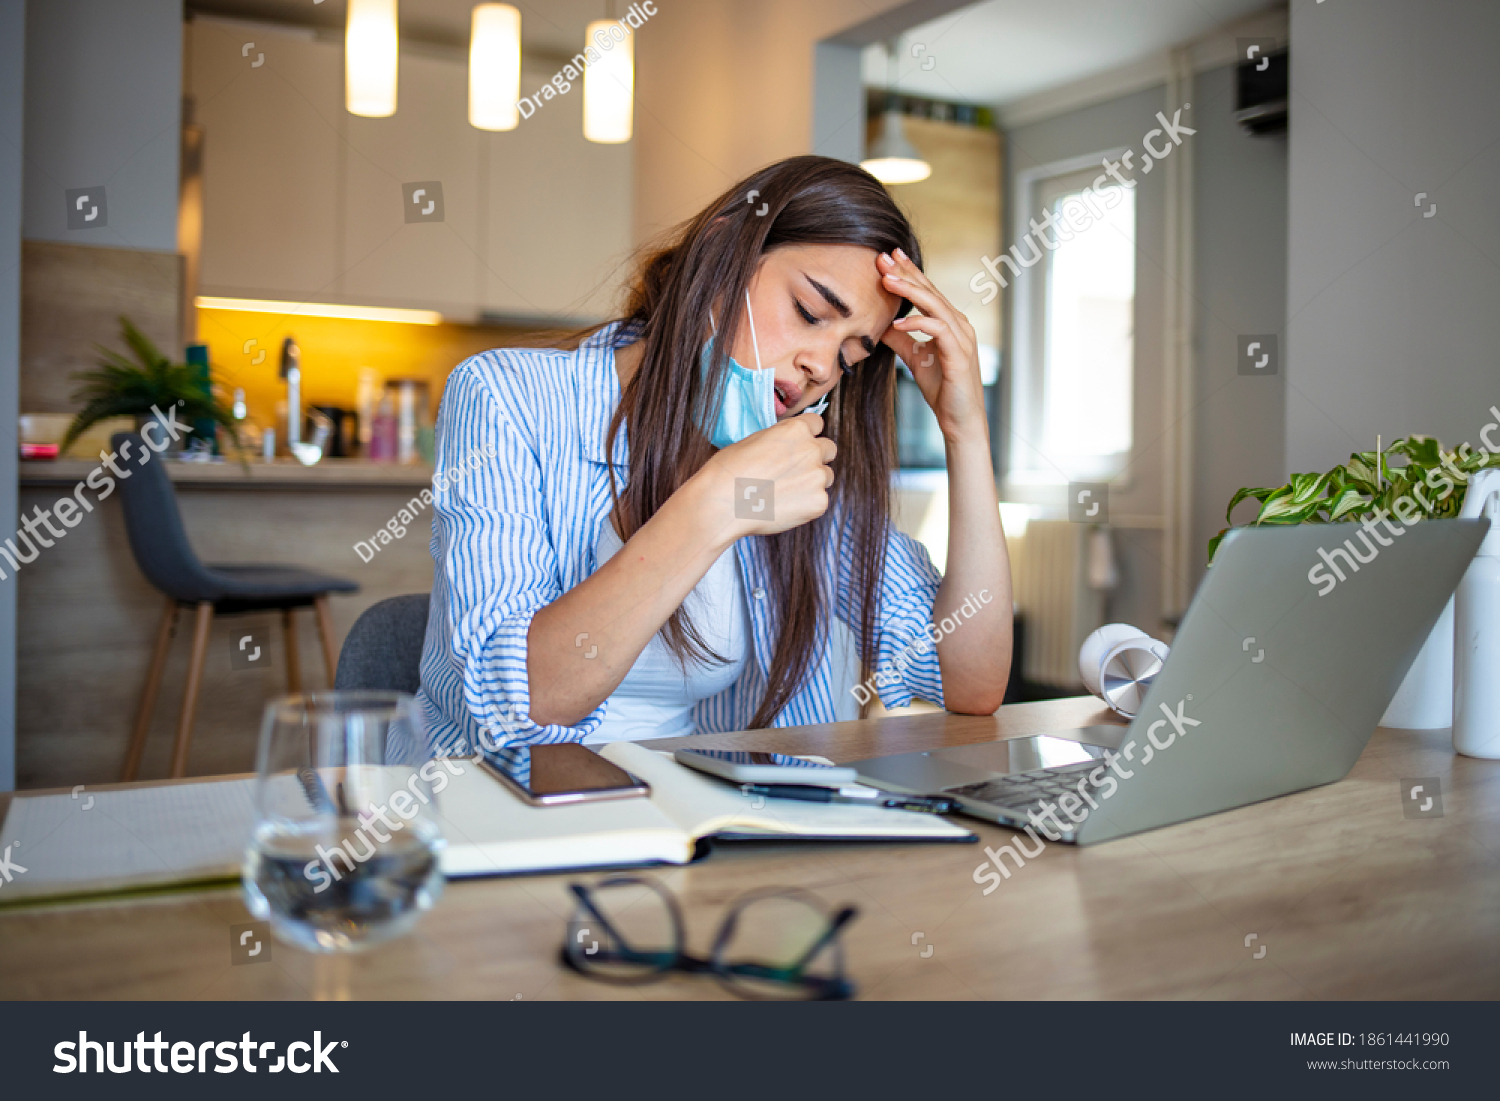 Woman working in the office and having difficulties breathing with face mask, she is pulling the mask down. The woman had to remove the mask to breathe after having to wear it for a long time #1861441990